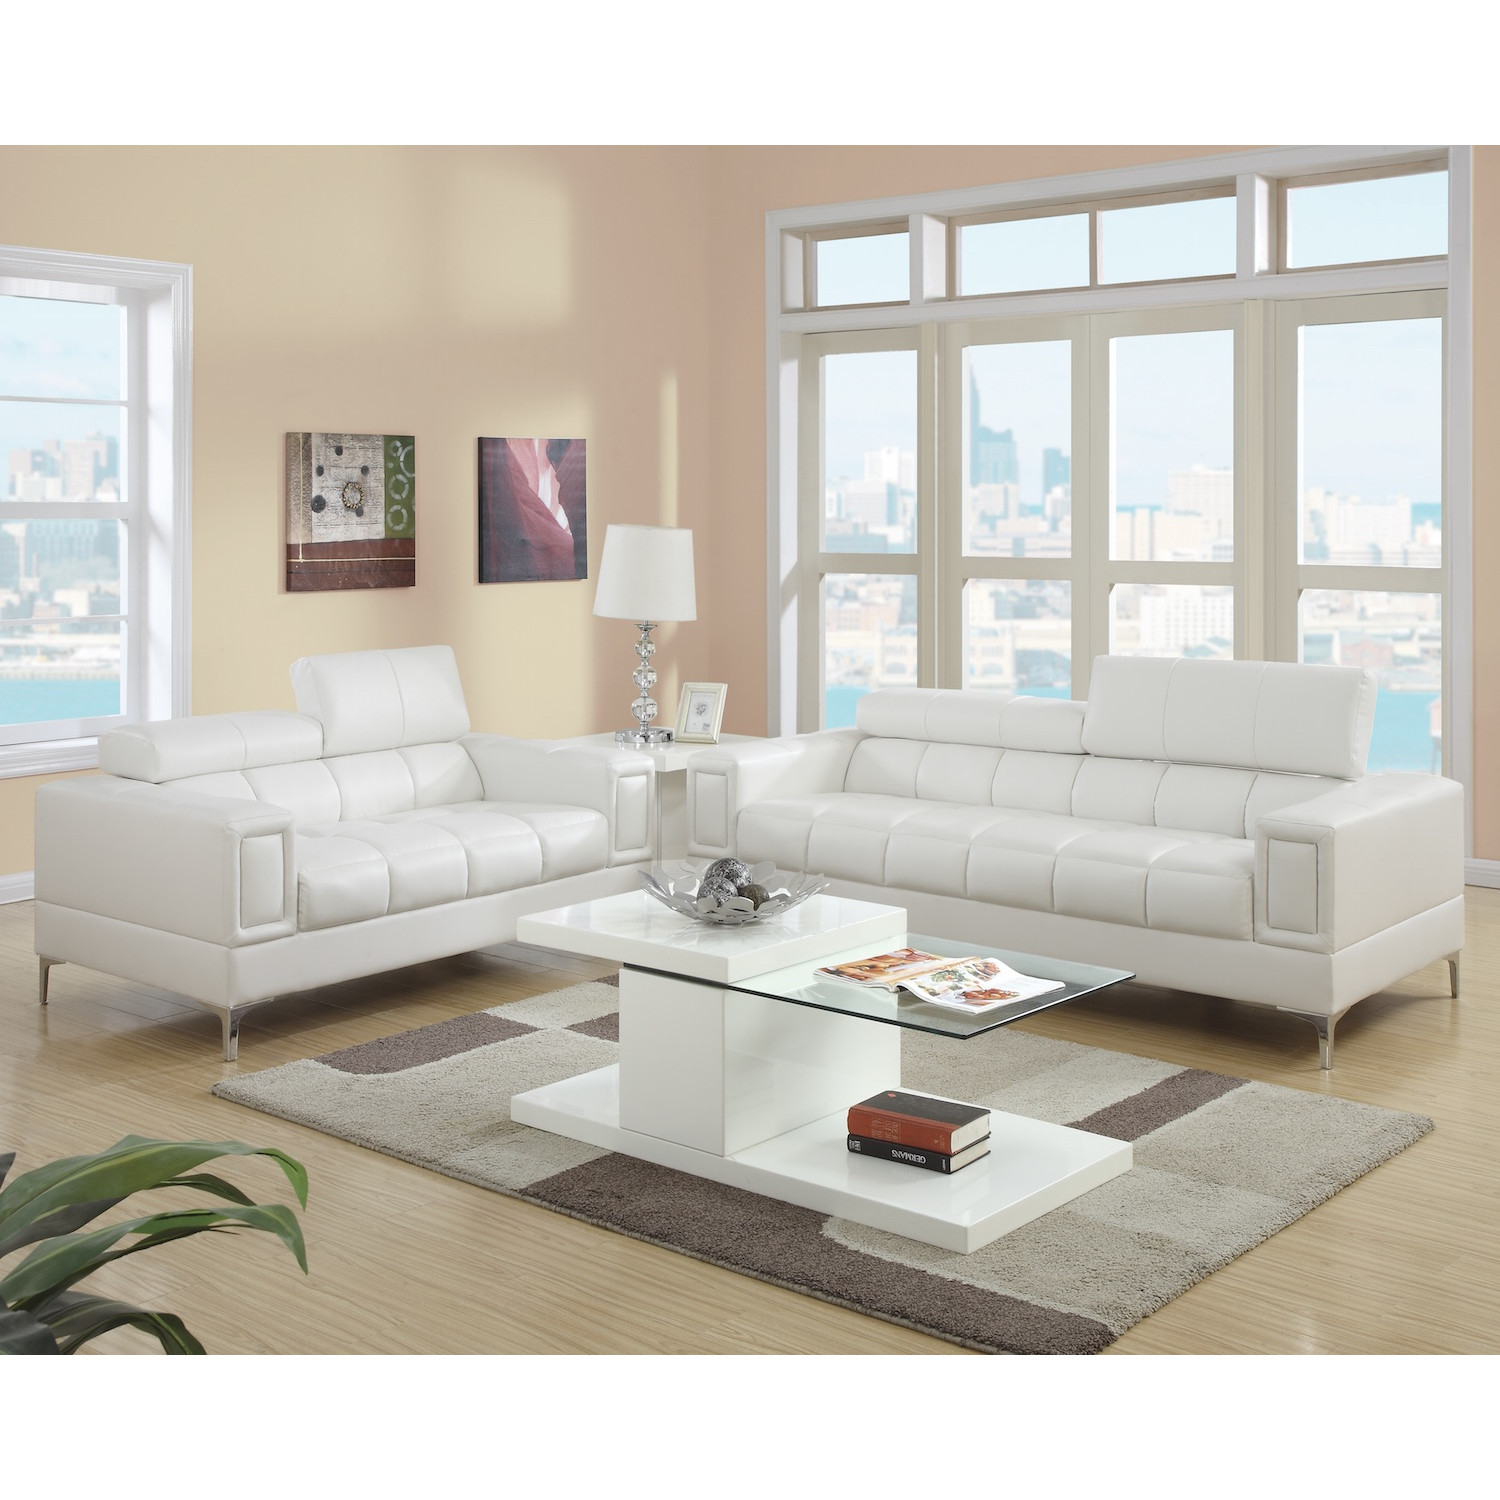 New QUICK VIEW modern living room sets